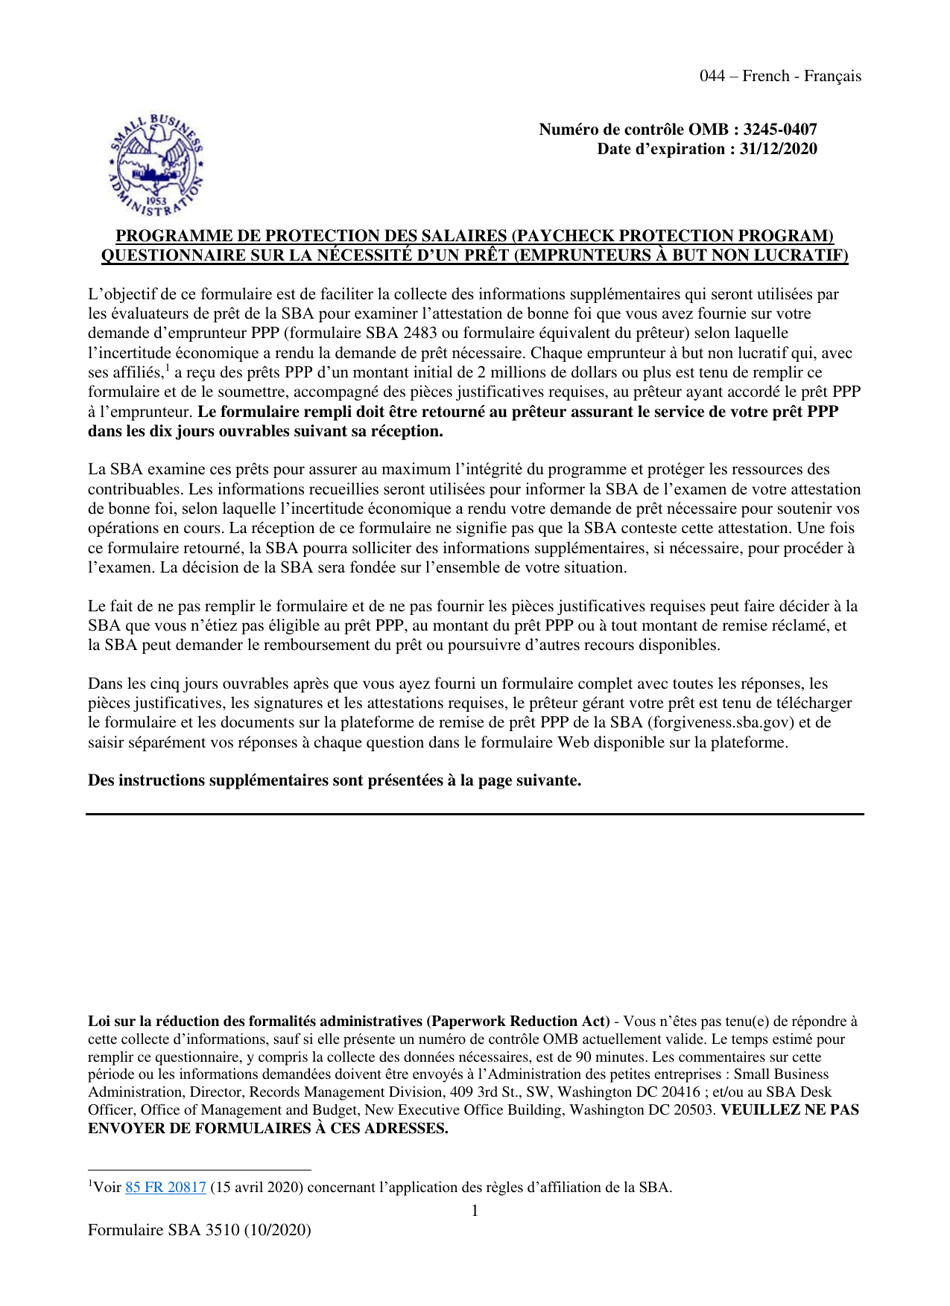 SBA Form 3510 Paycheck Protection Program Loan Necessity Questionnaire (Non-profit Borrowers) (French), Page 1